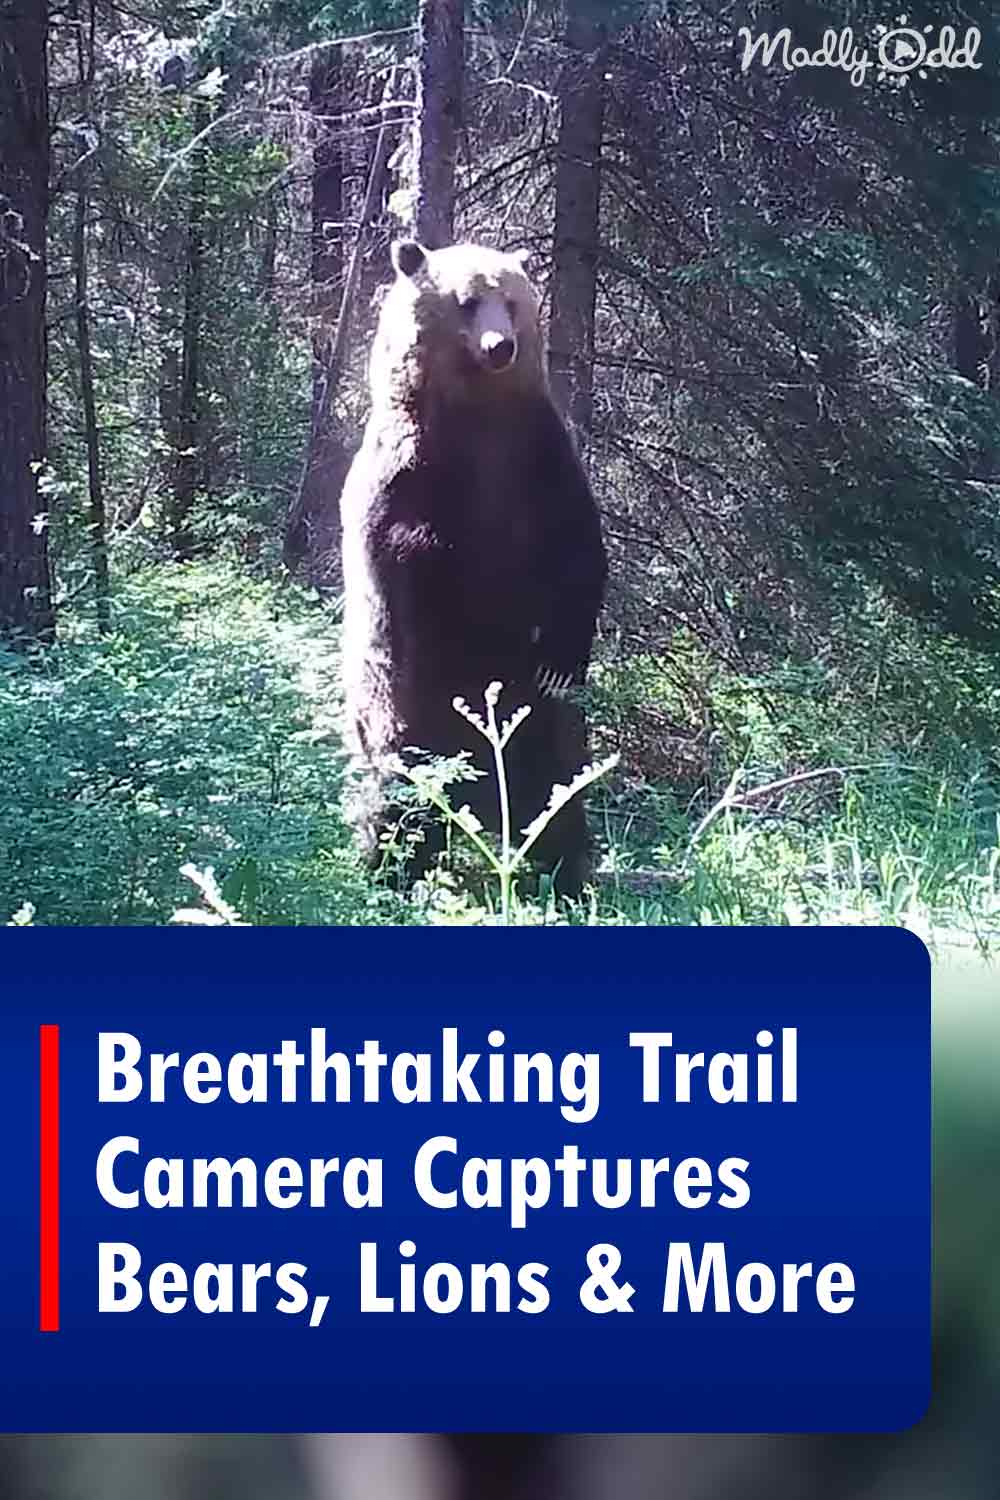 Breathtaking Trail Camera Captures Bears, Lions & More